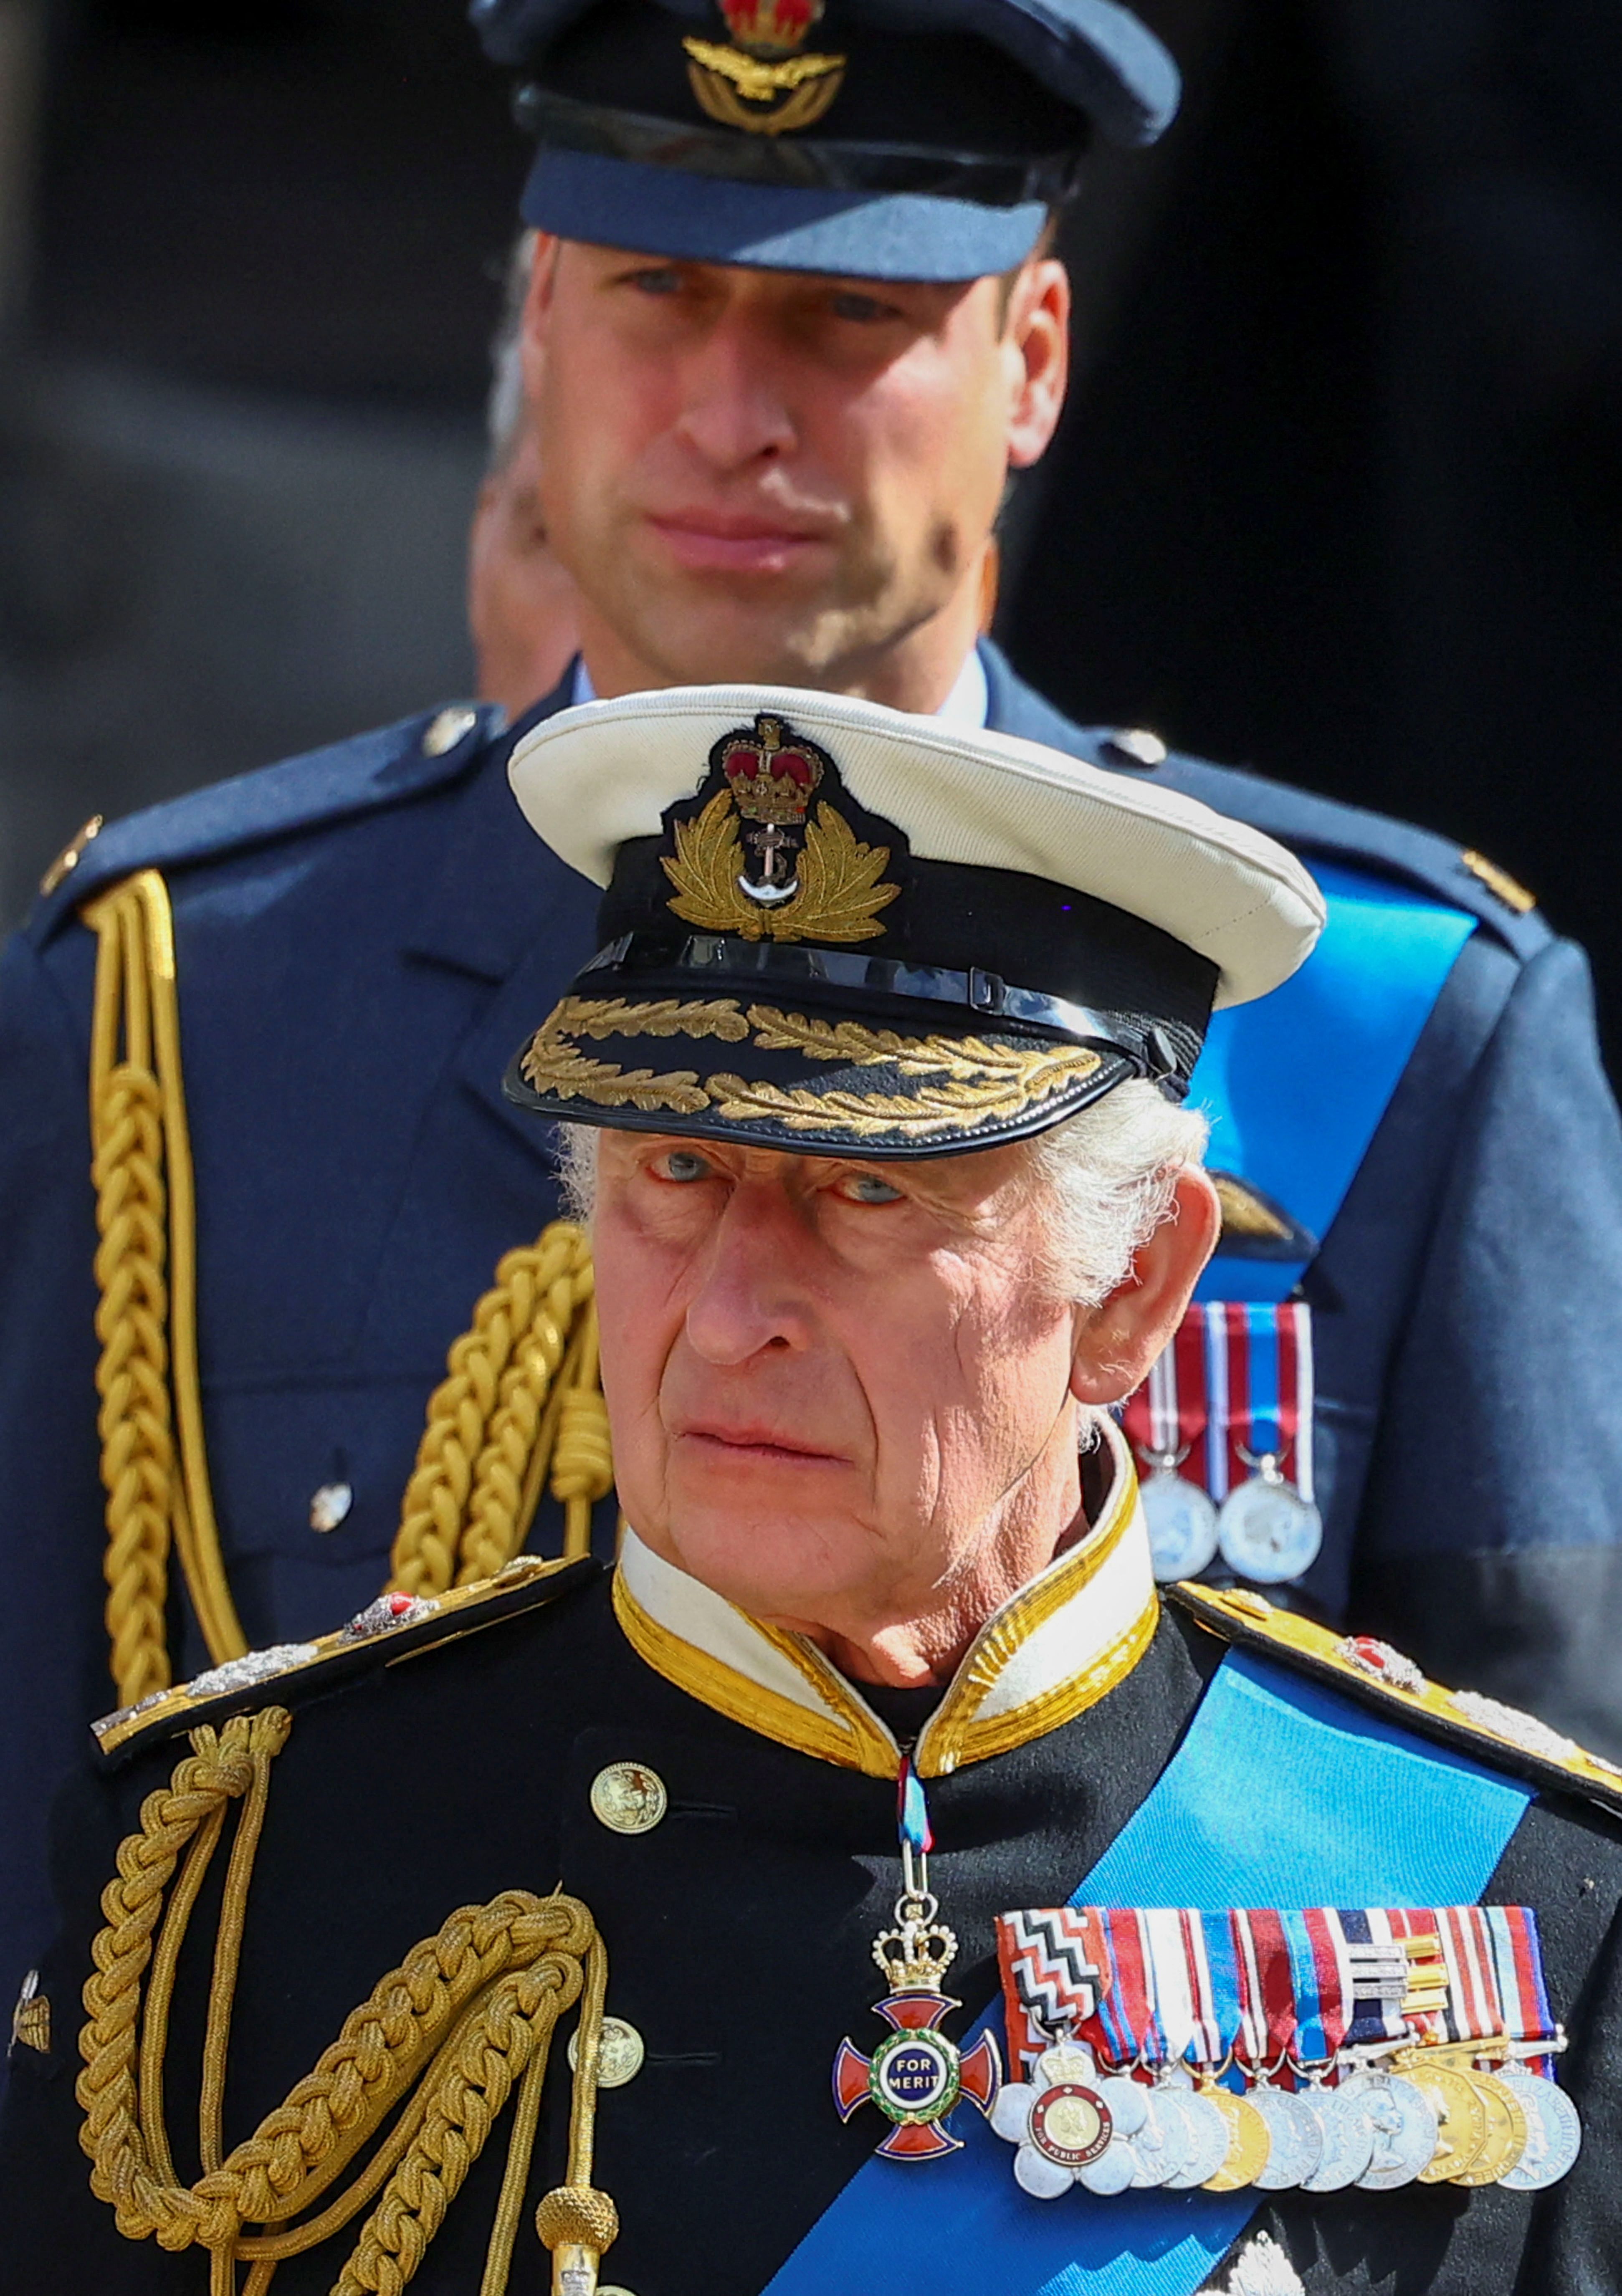 Britain's King Charles III and William, Prince of Wales attend the state funeral and burial of Britain's Queen Elizabeth, in London, Britain, September 19, 2022. | Source: Getty Images